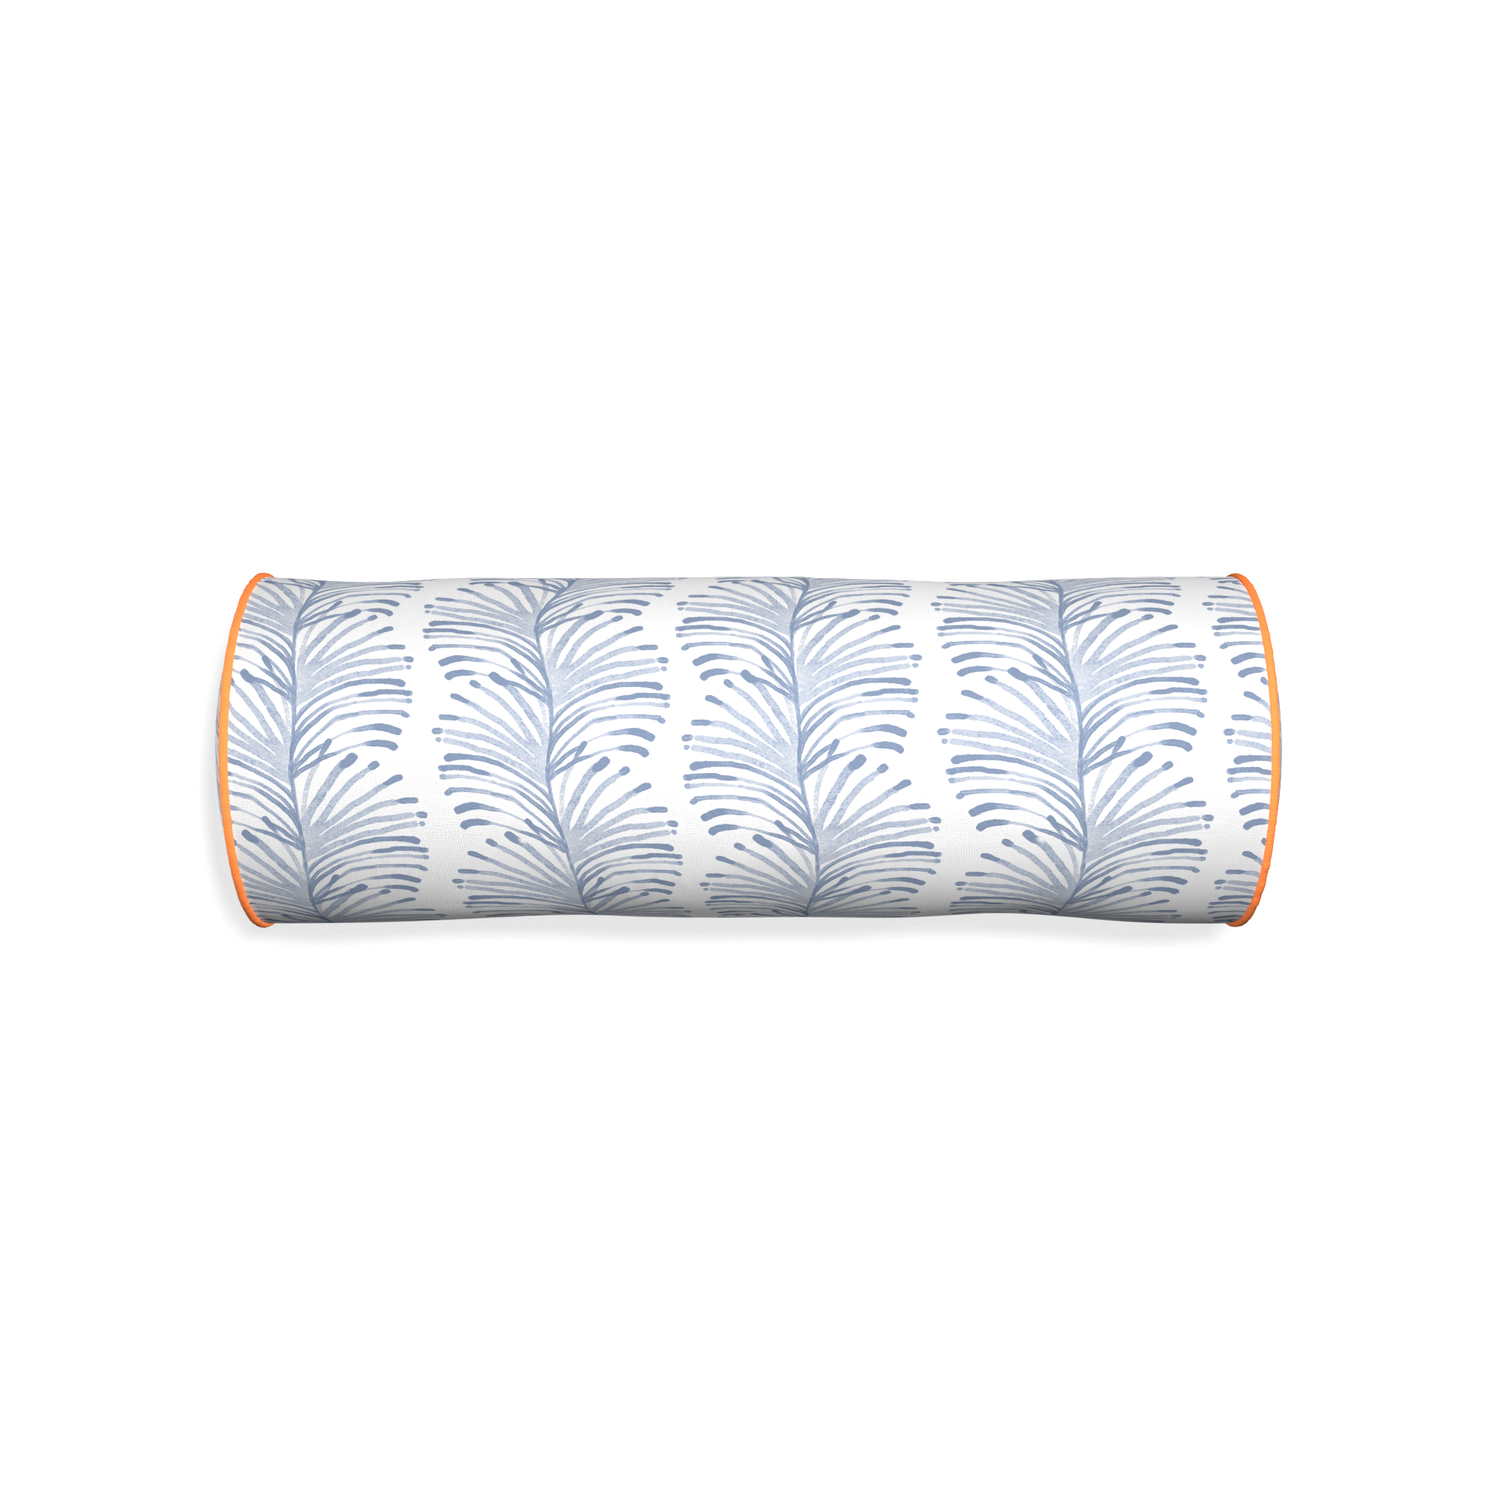 Bolster emma sky custom sky blue botanical stripepillow with clementine piping on white background